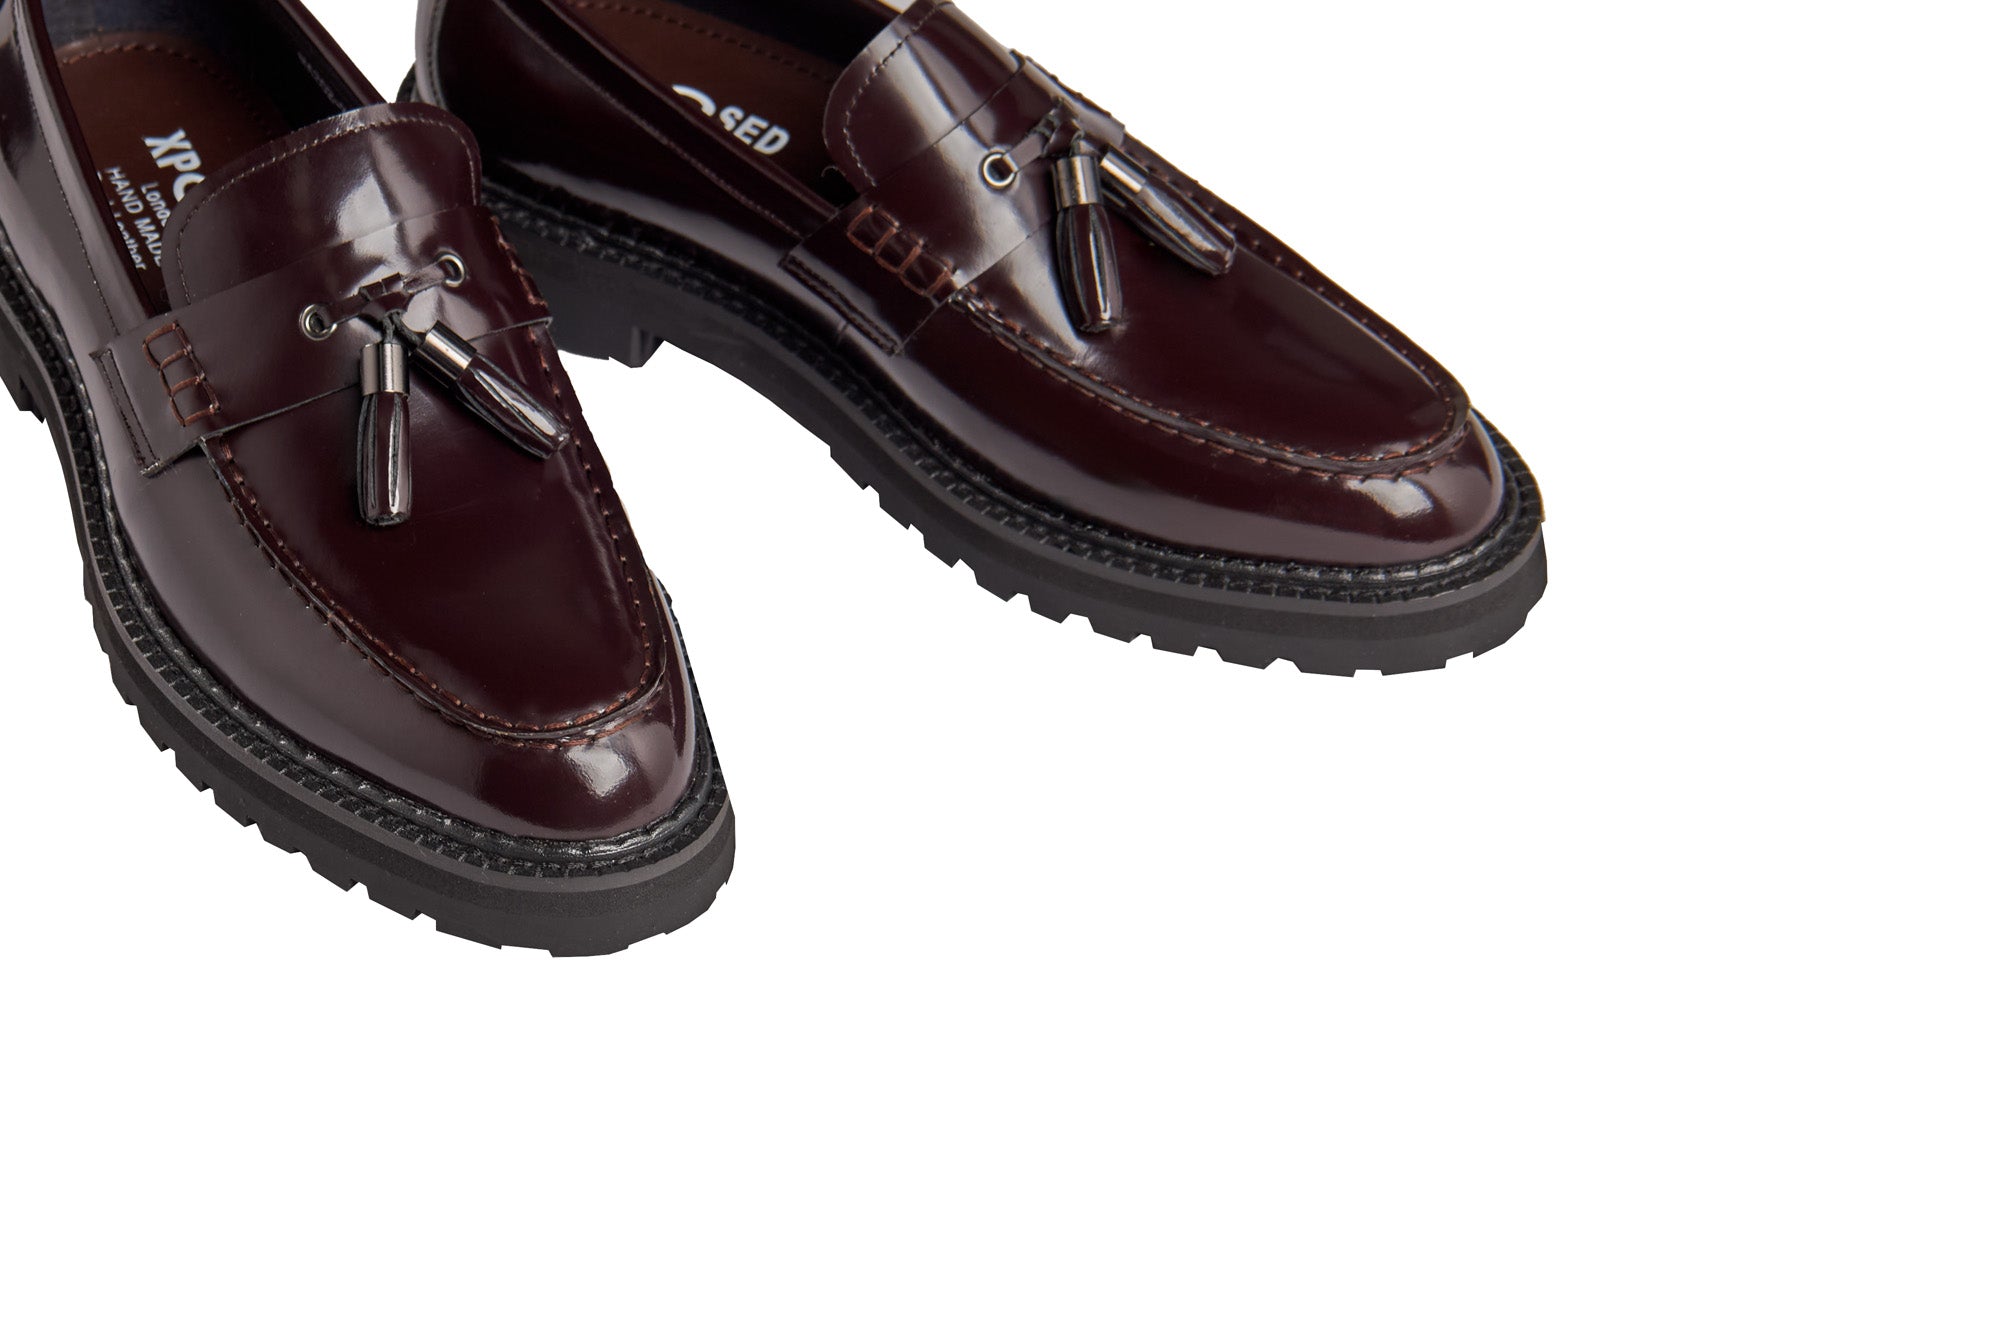 BROWN PATENT LEATHER TASSEL LOAFERS